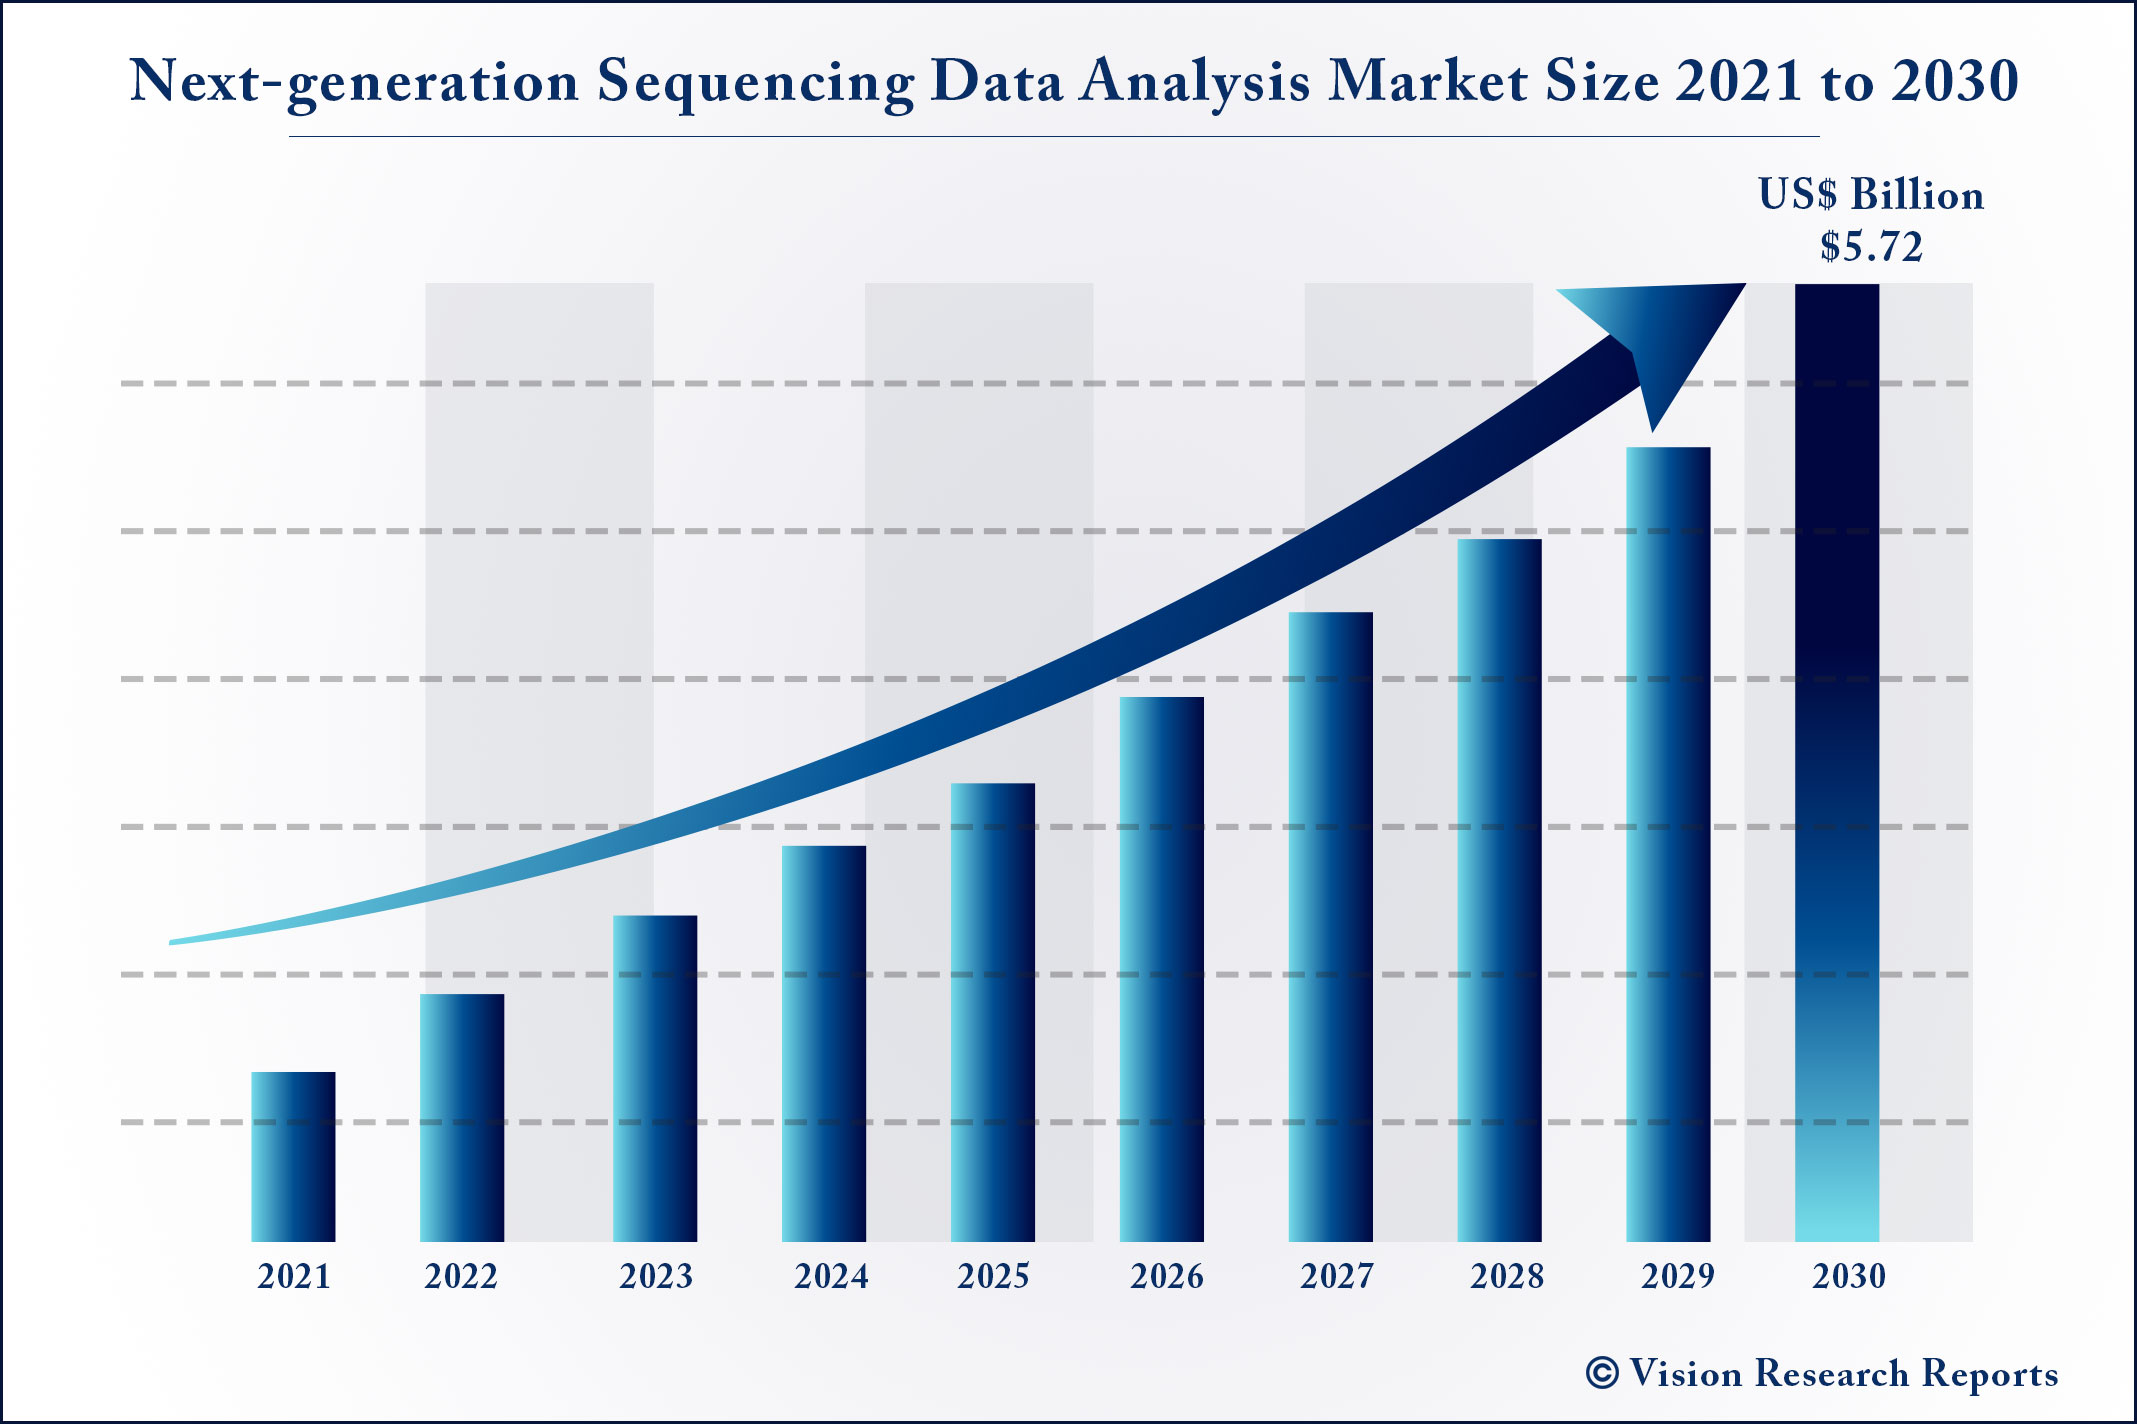 Next-generation Sequencing Data Analysis Market Size 2021 to 2030